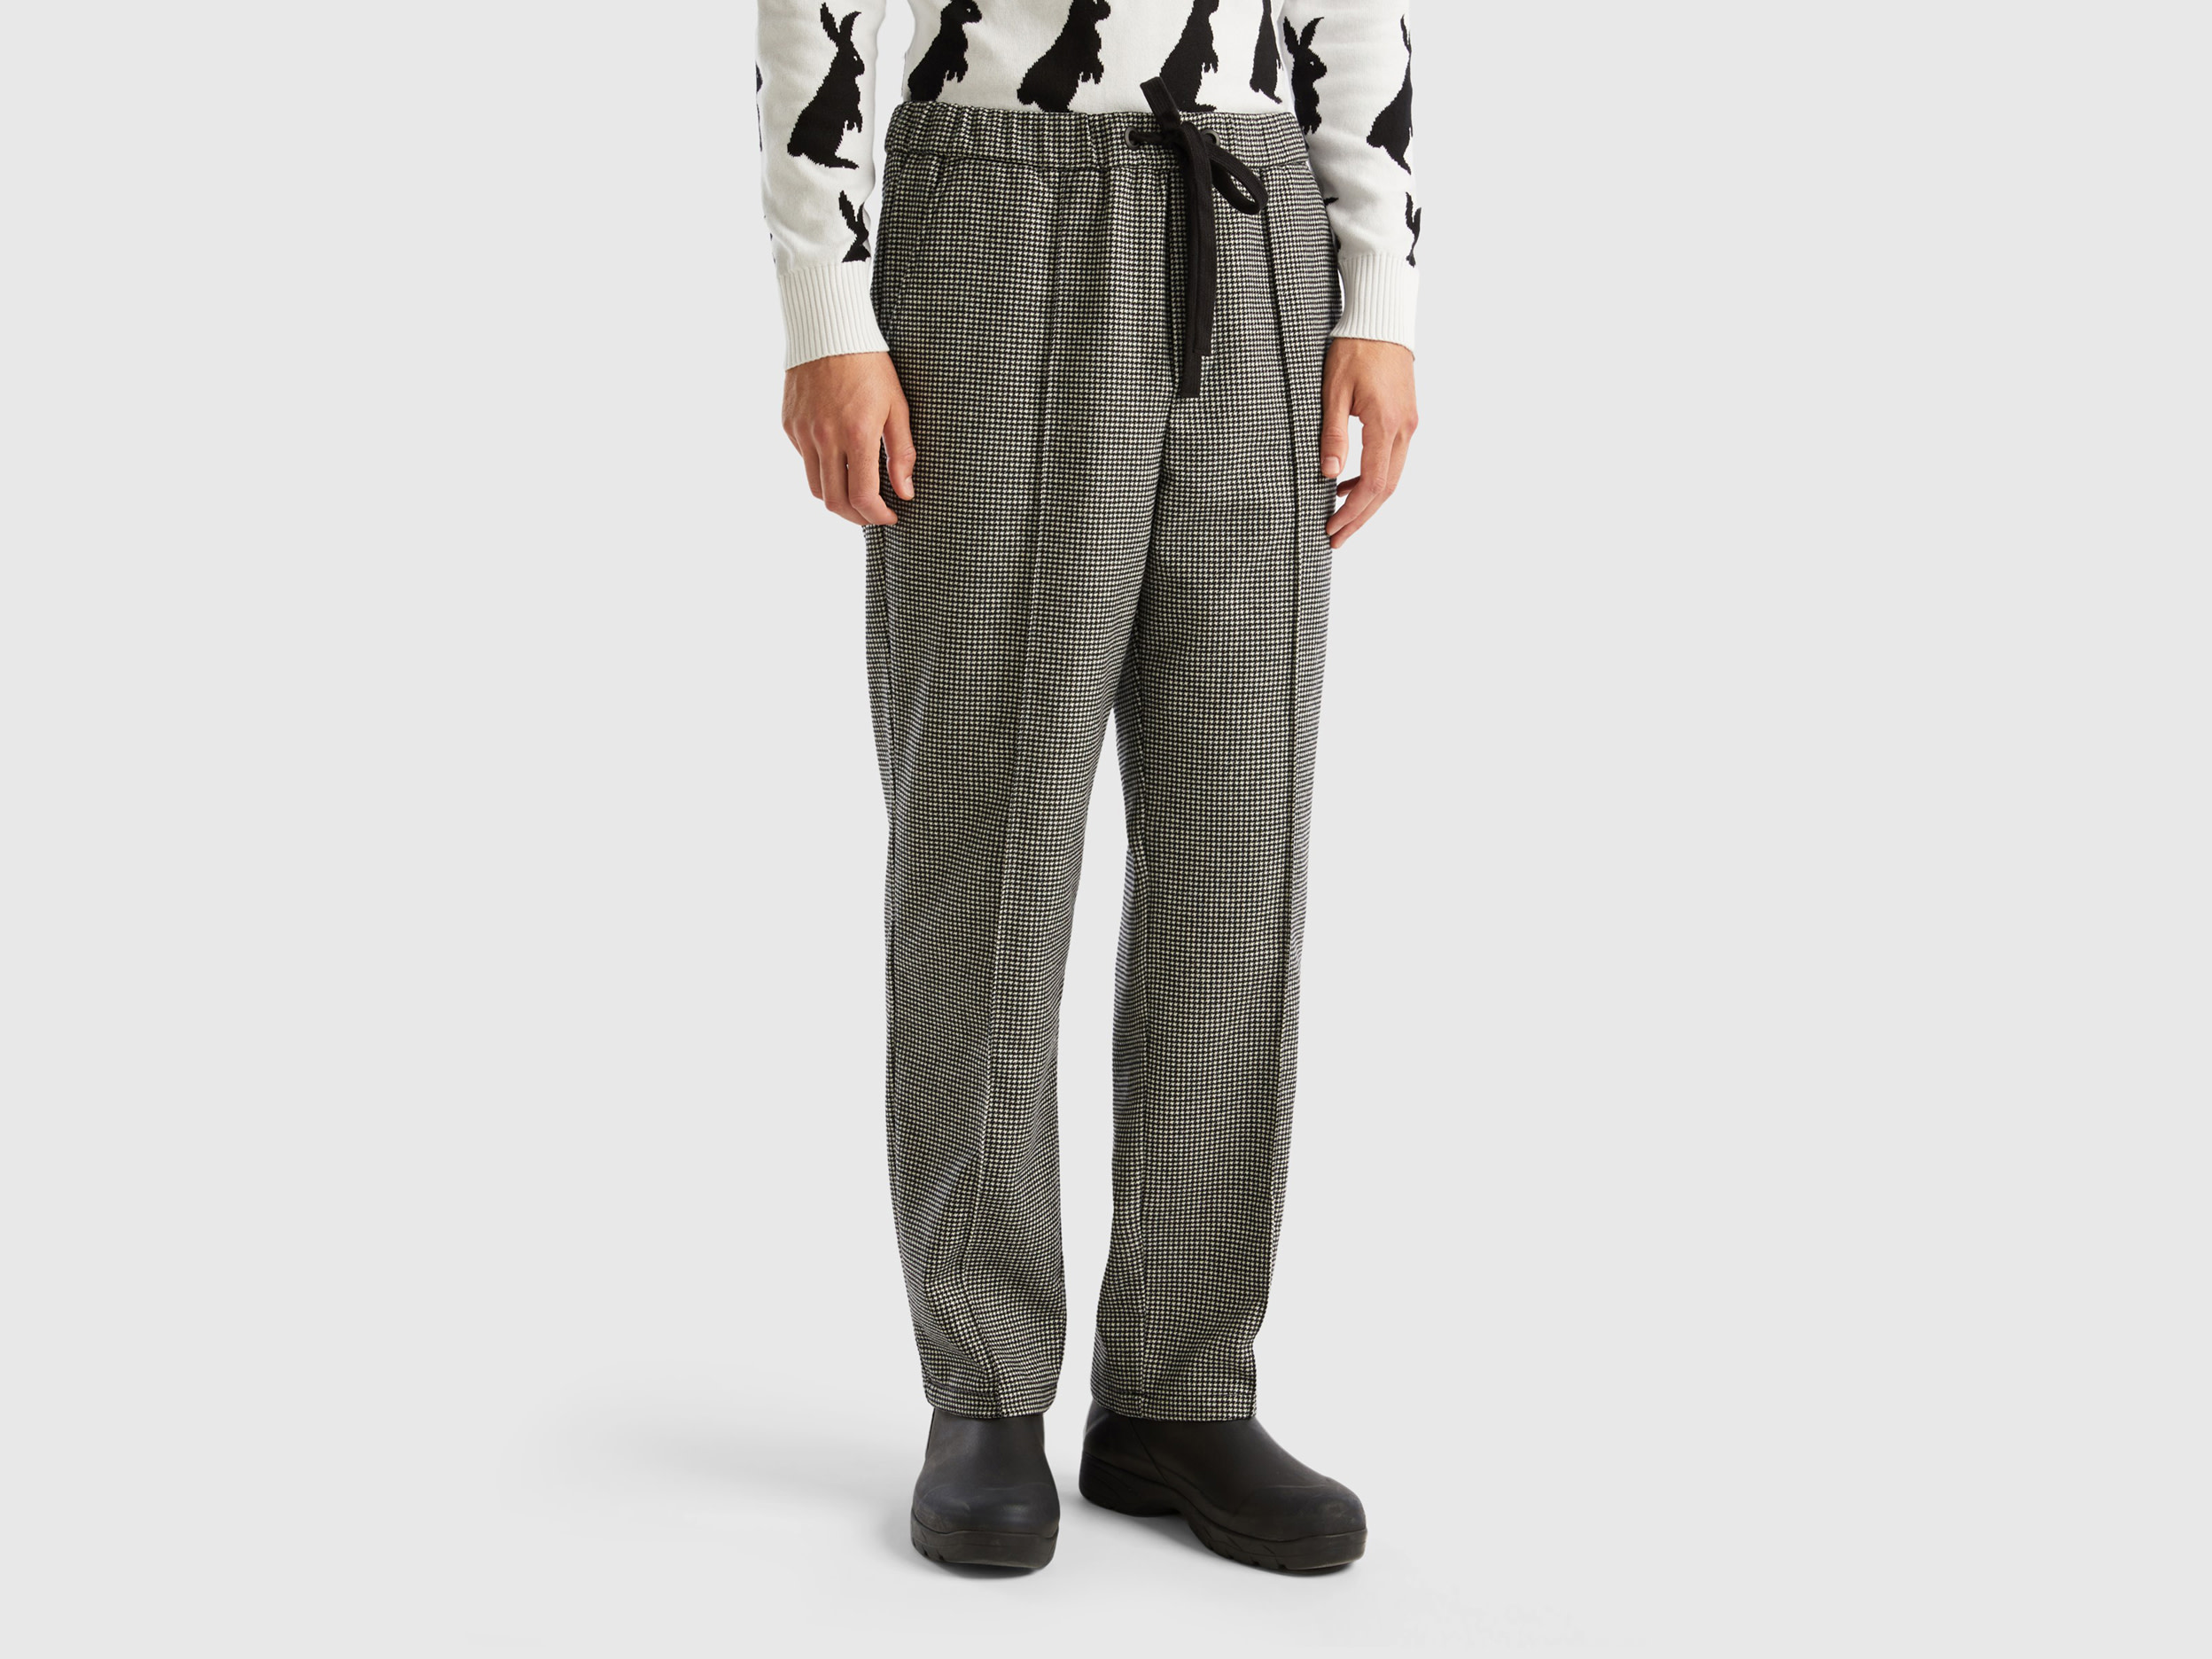 Benetton, Houndstooth Joggers, size XS, Gray, Men